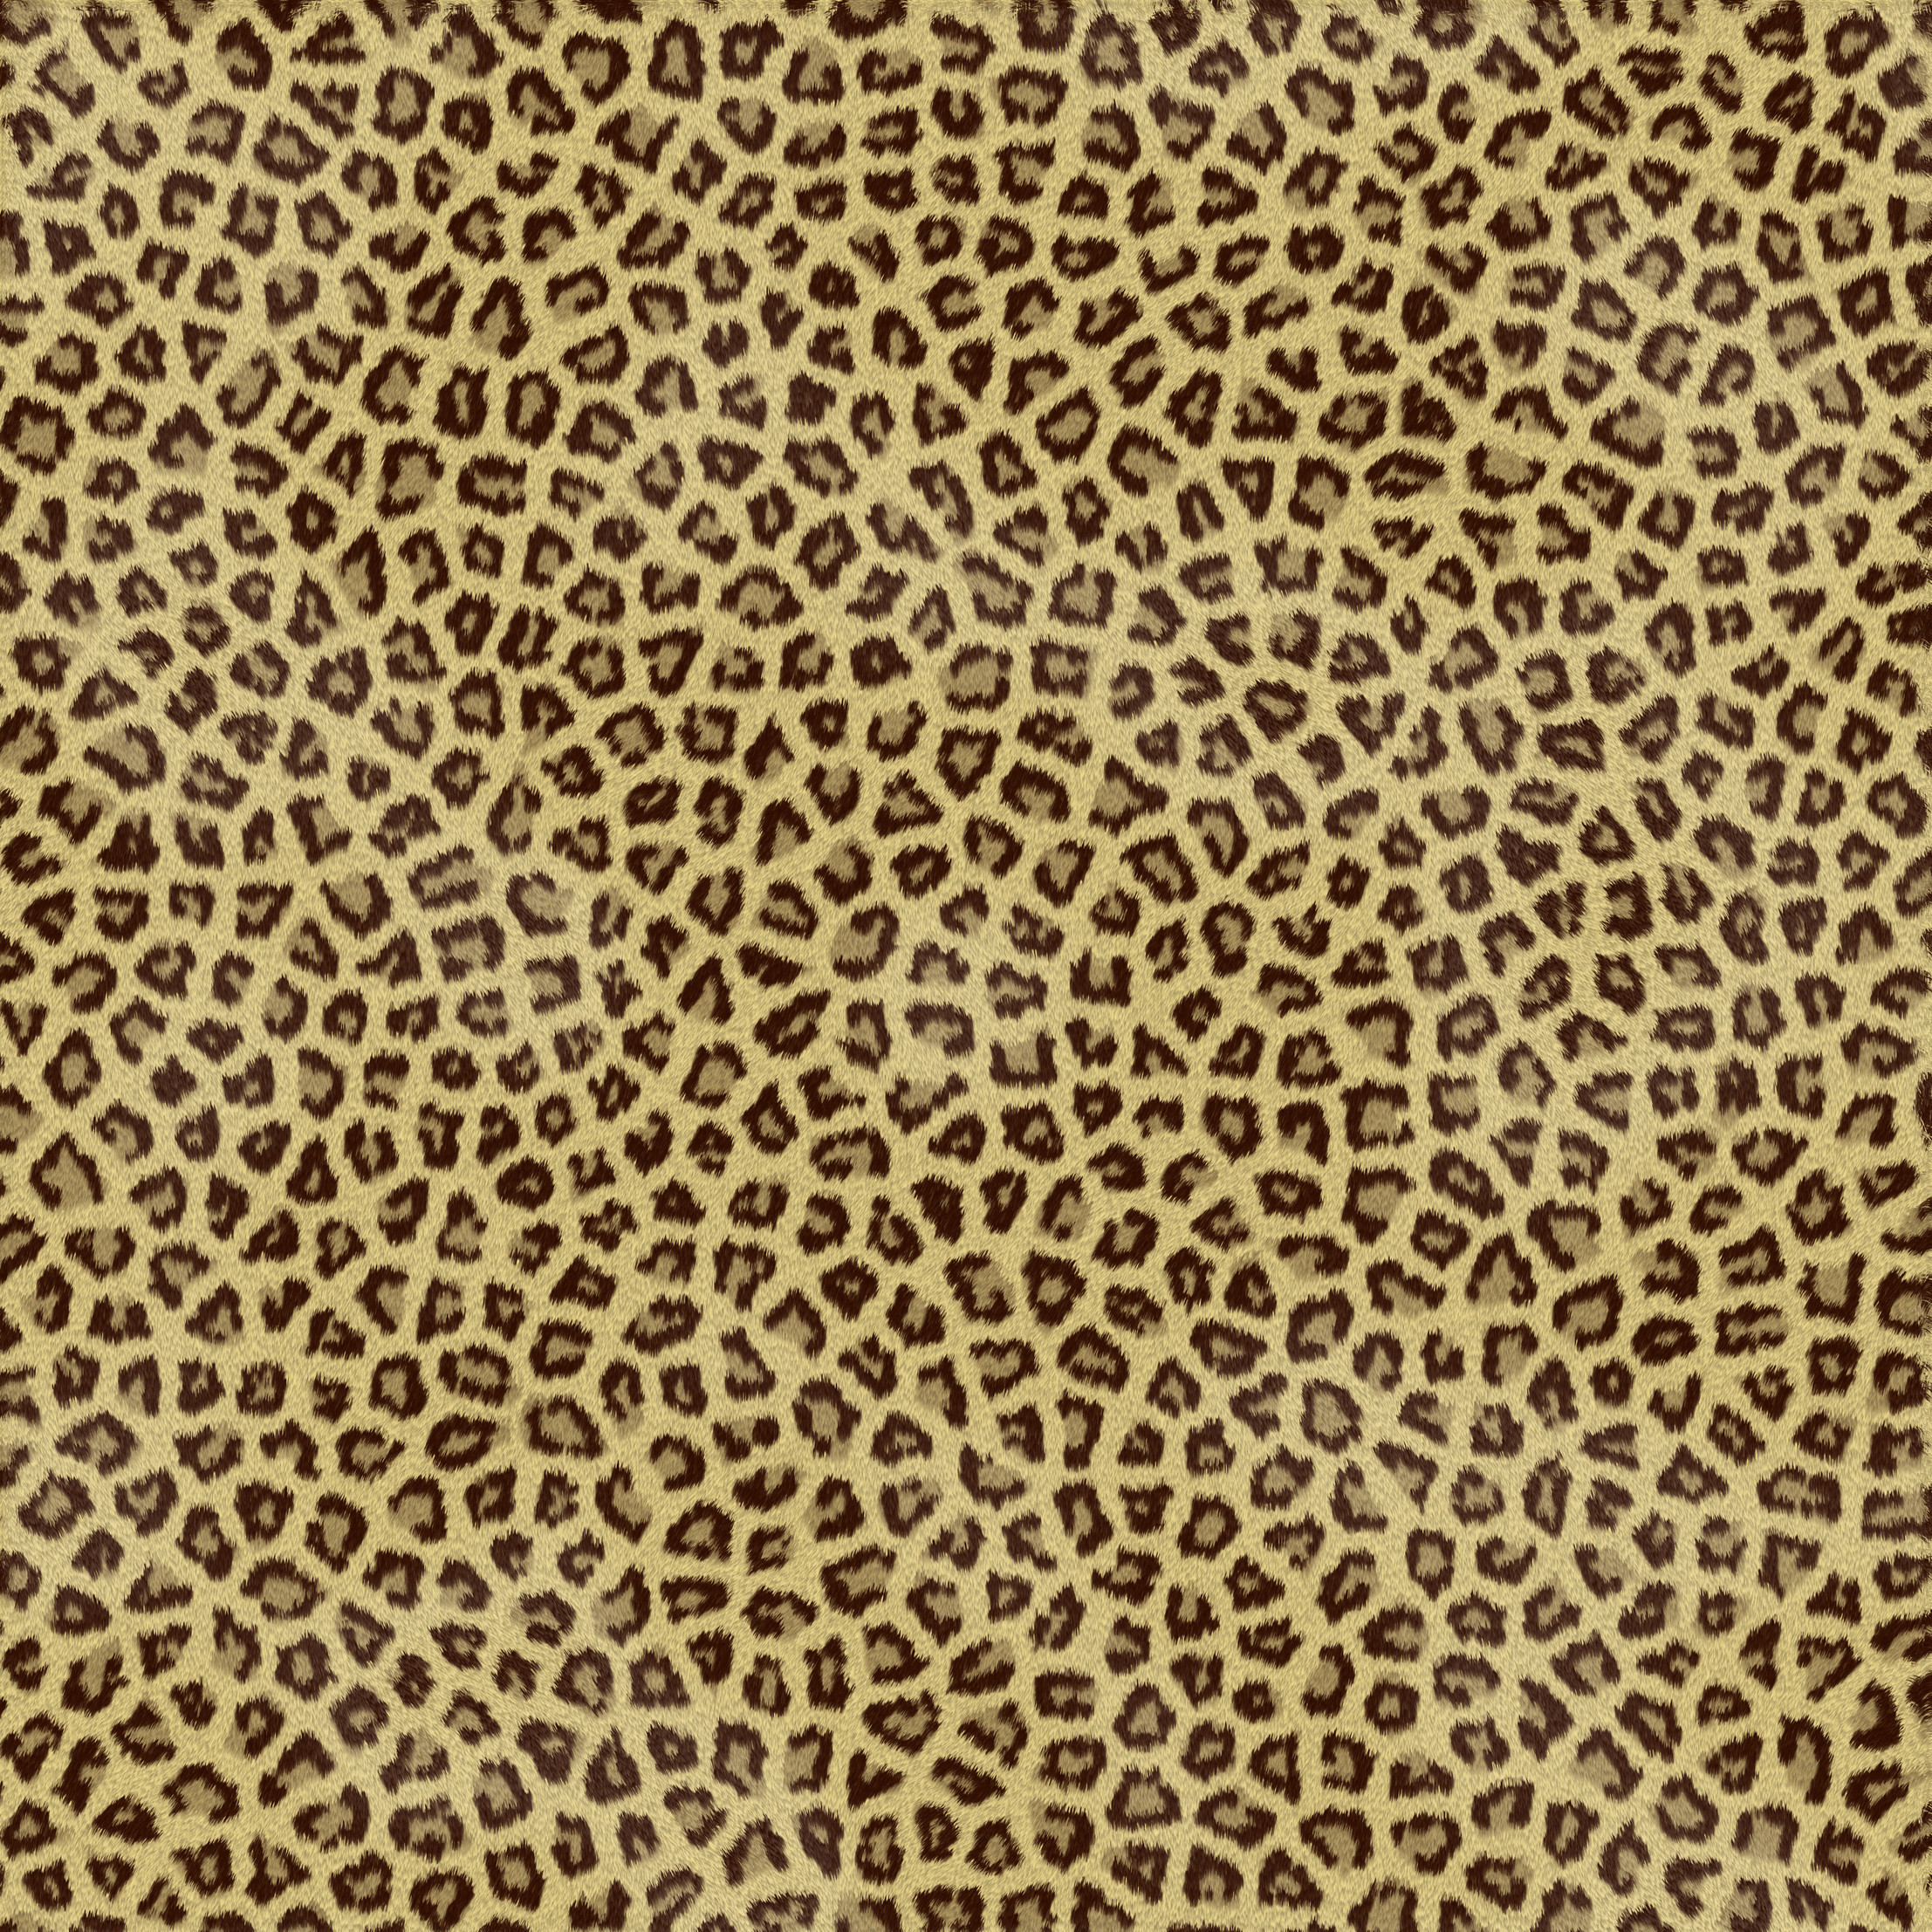 412 Leopard Print Background Stock Photos HighRes Pictures and Images   Getty Images